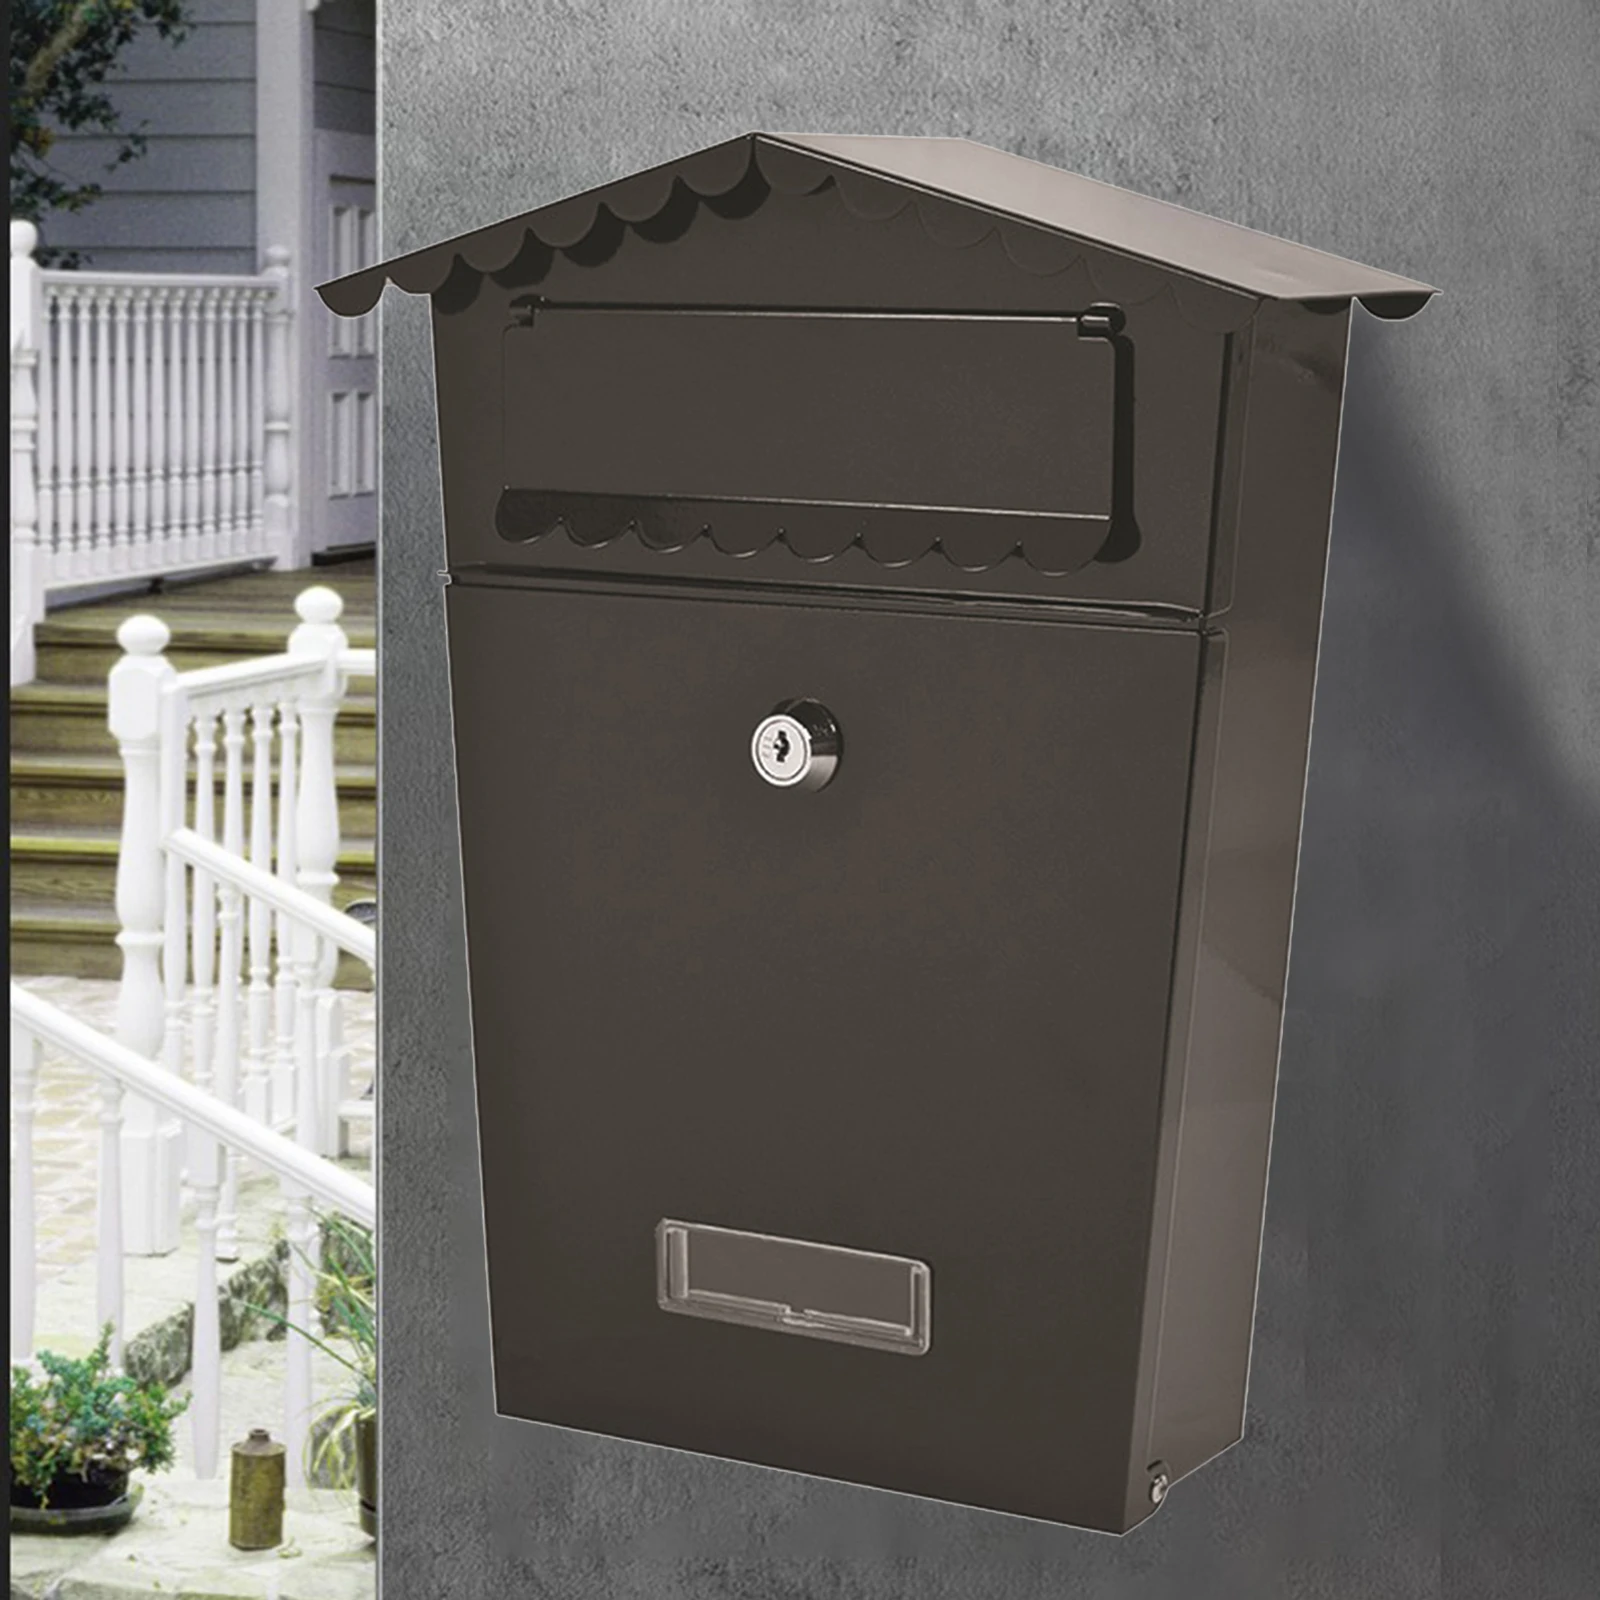 Mailbox With Lock and Key 30.3x17.3x7.9Inch,Mailbox Wall Mount Parcel Drop Box 